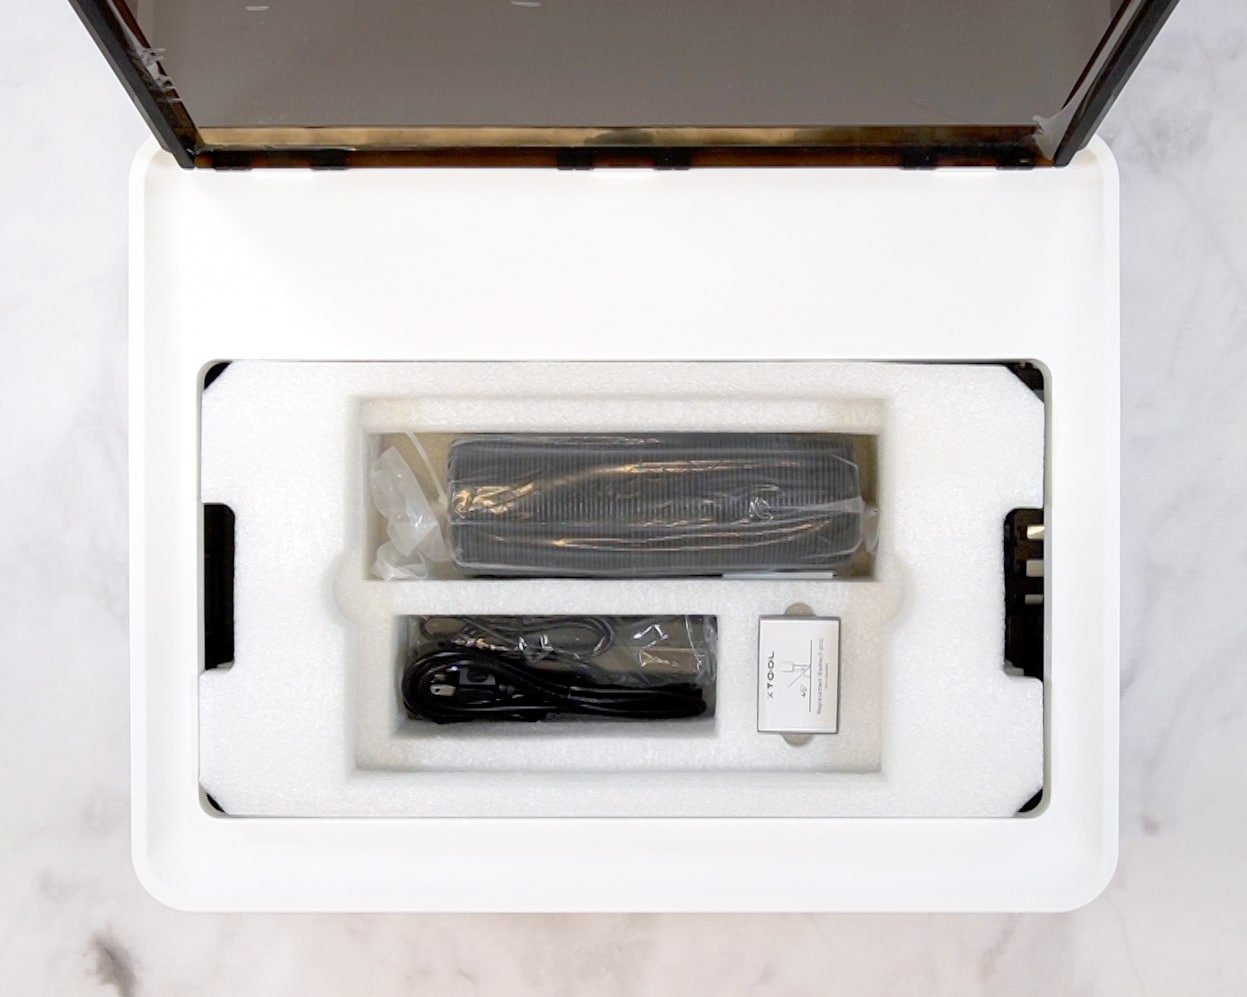 Overhead view of power cords and packaging materials inside the xTool M1 laser cutter